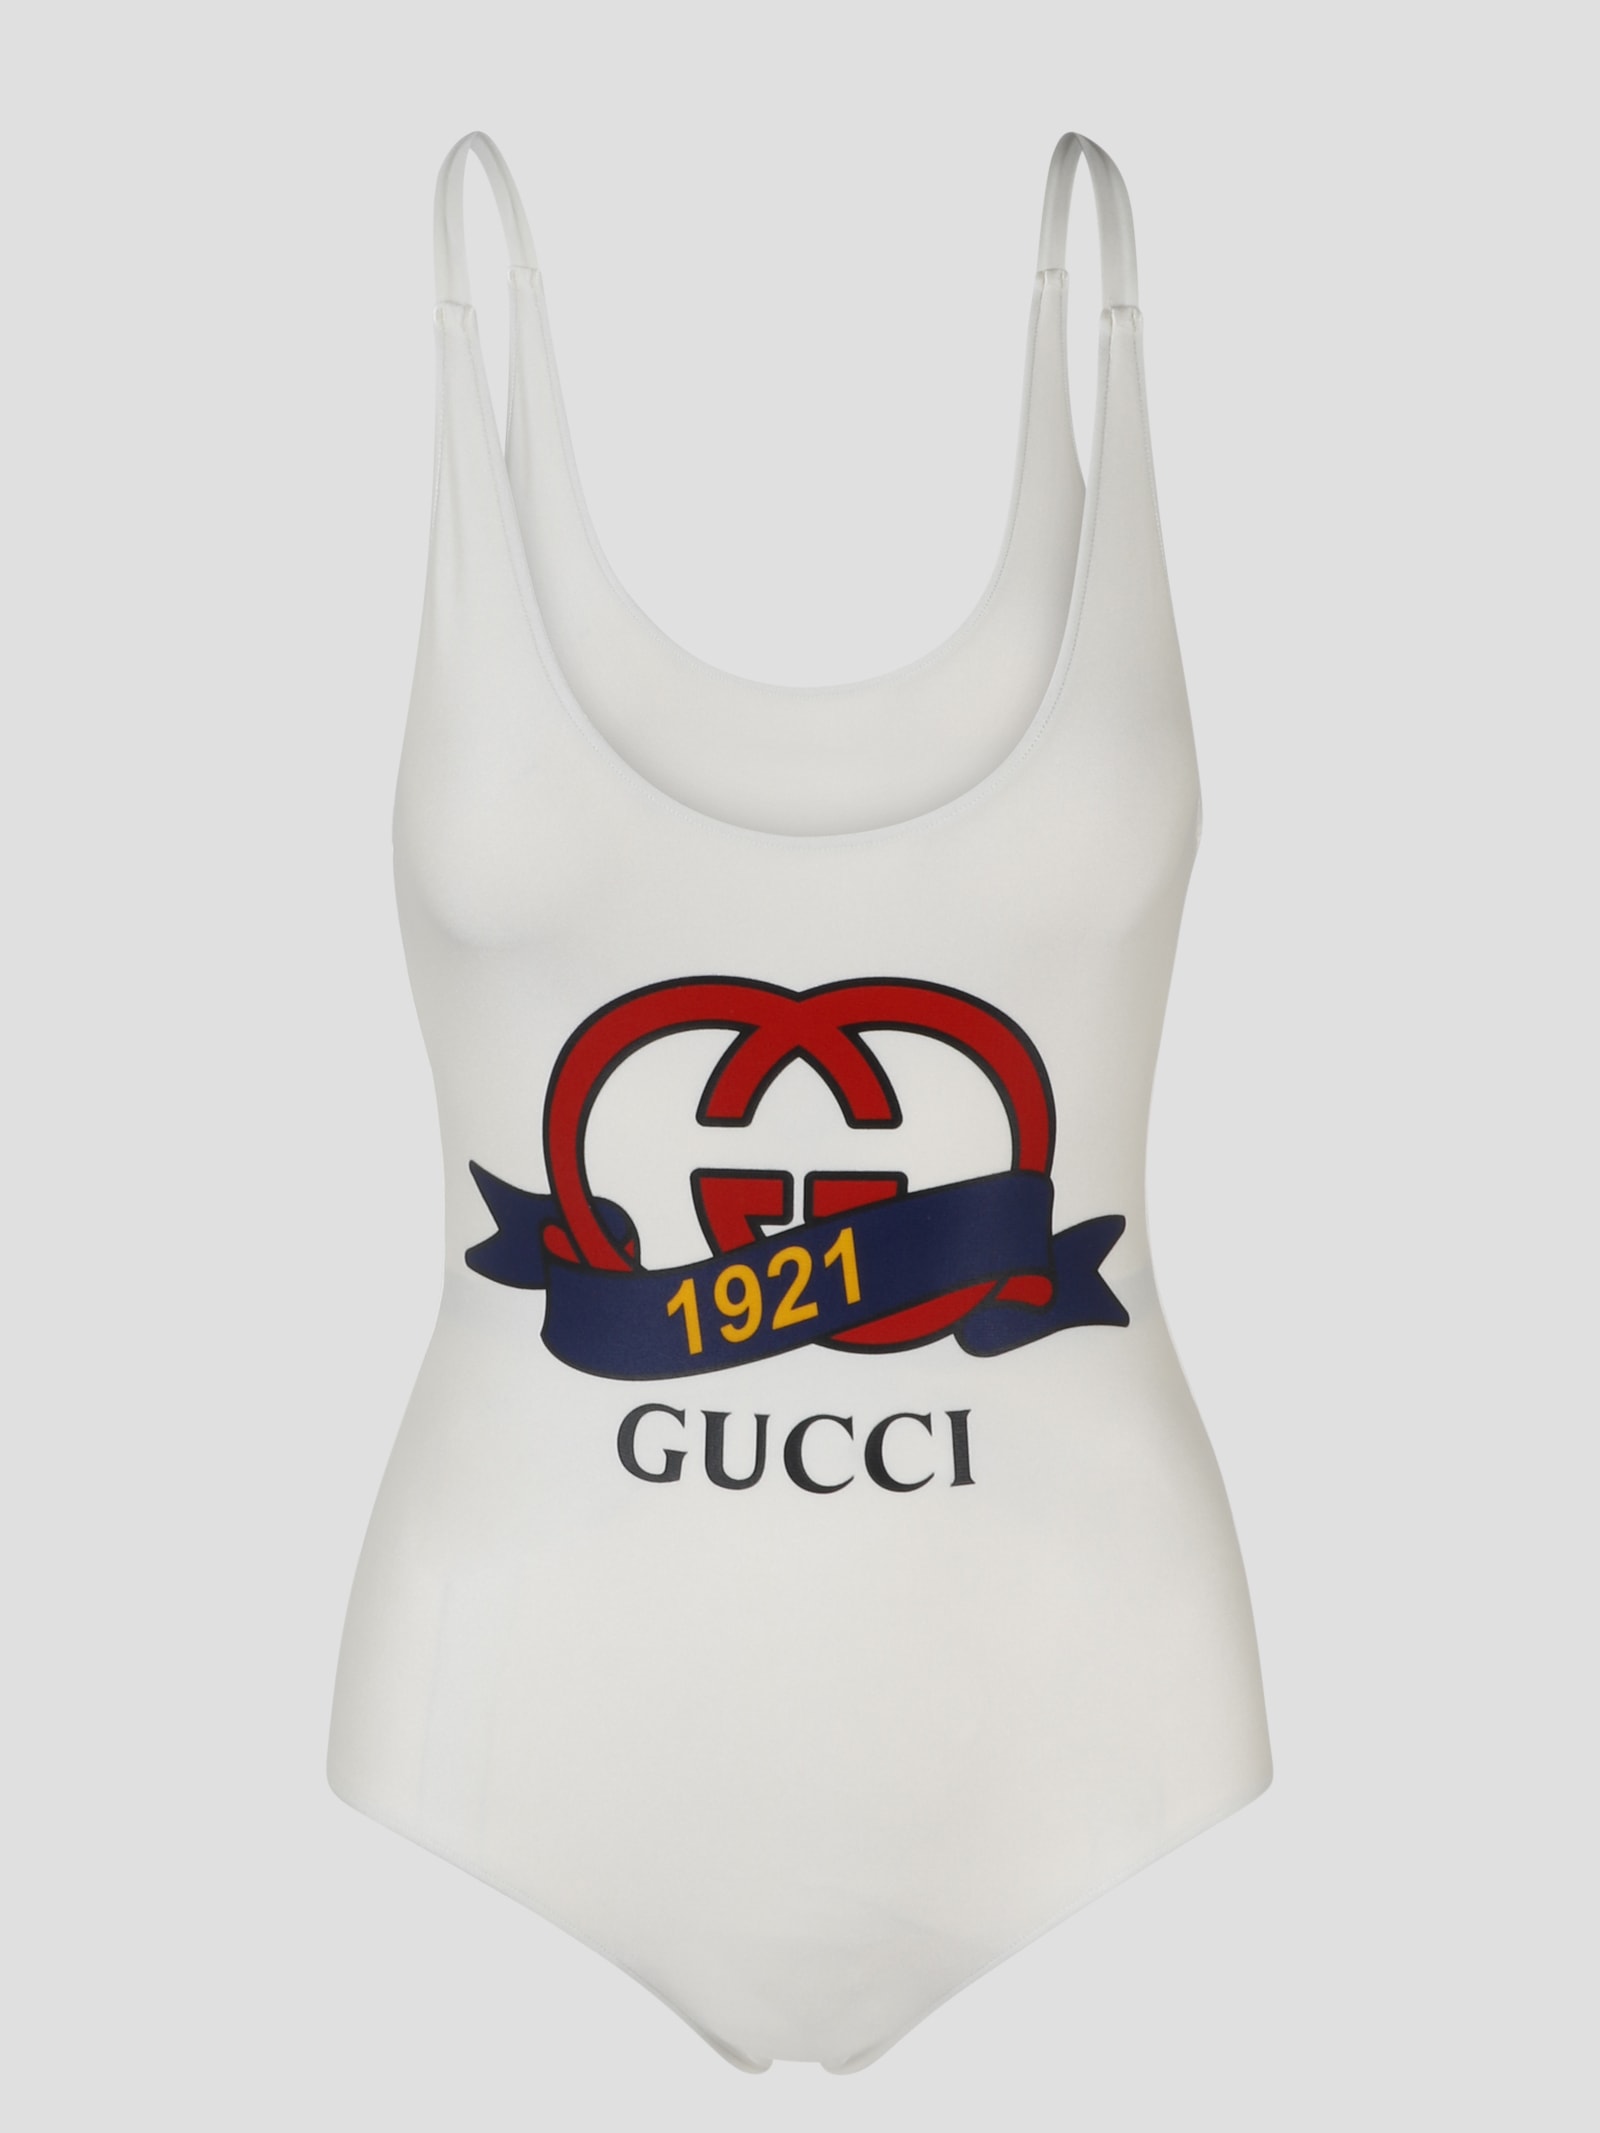 GUCCI SPARKLING JERSEY SWIMSUIT